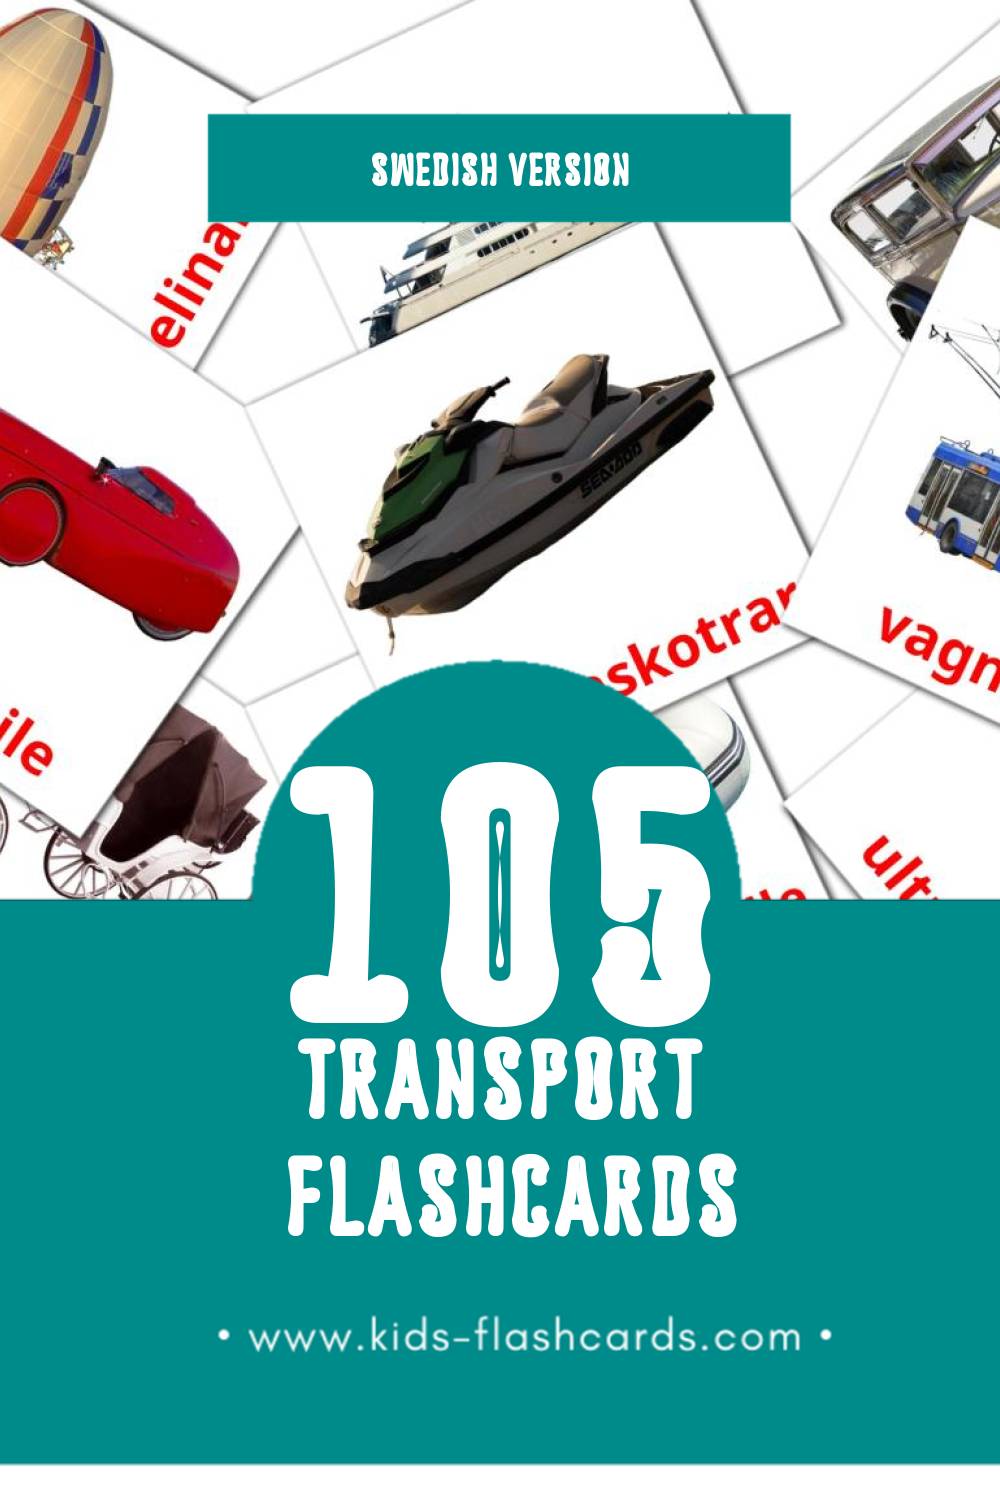 Visual Transport Flashcards for Toddlers (105 cards in Swedish)